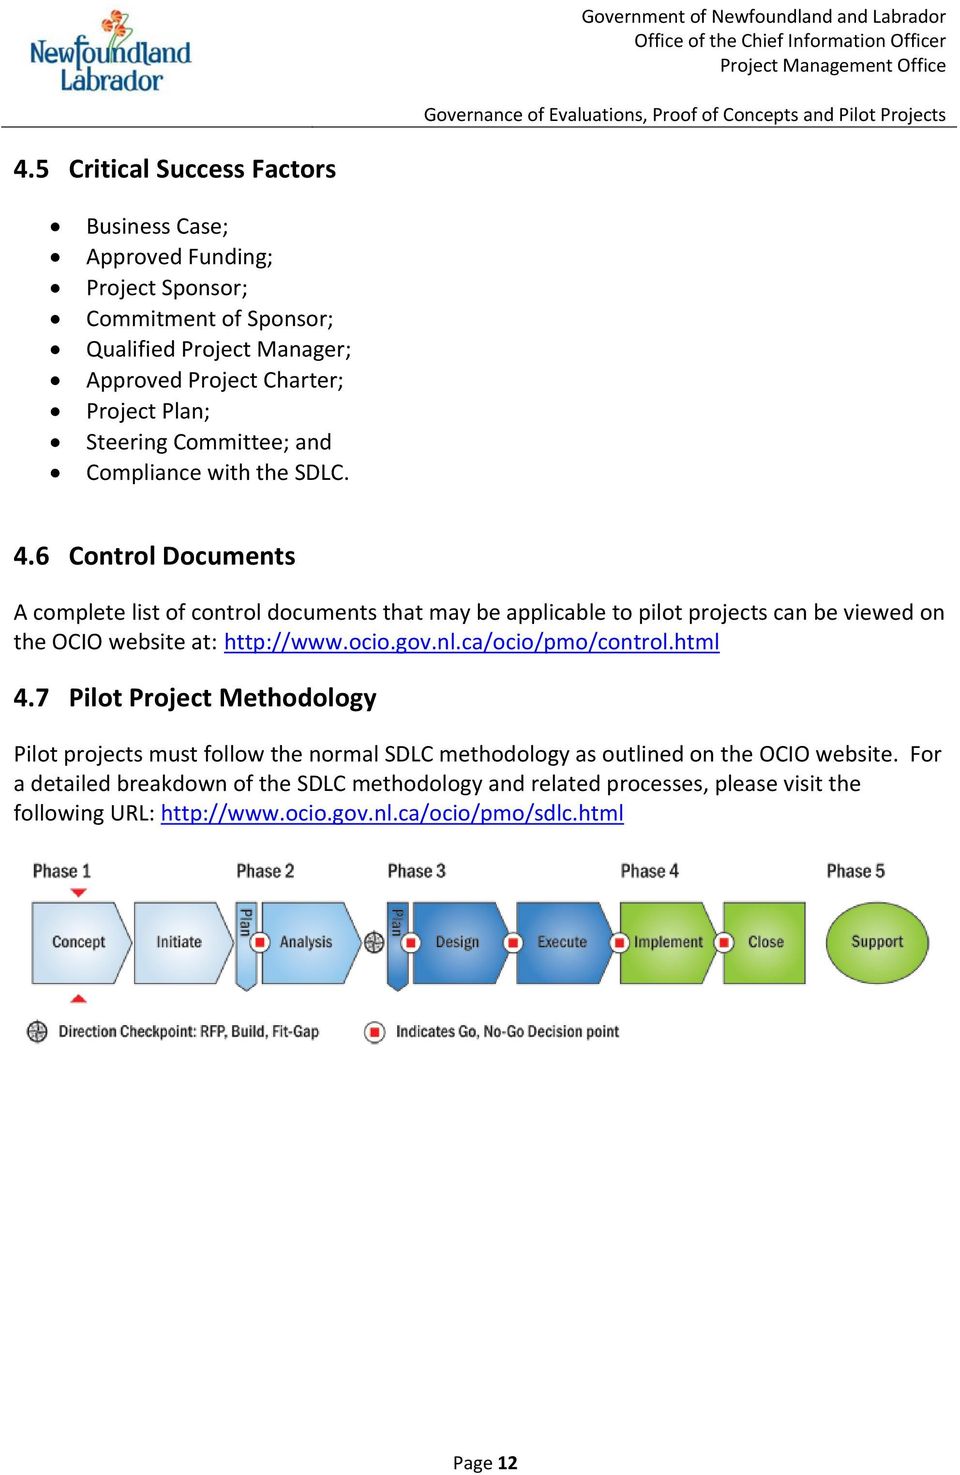 6 Control Documents A complete list of control documents that may be applicable to pilot projects can be viewed on the OCIO website at: http://www.ocio.gov.nl.